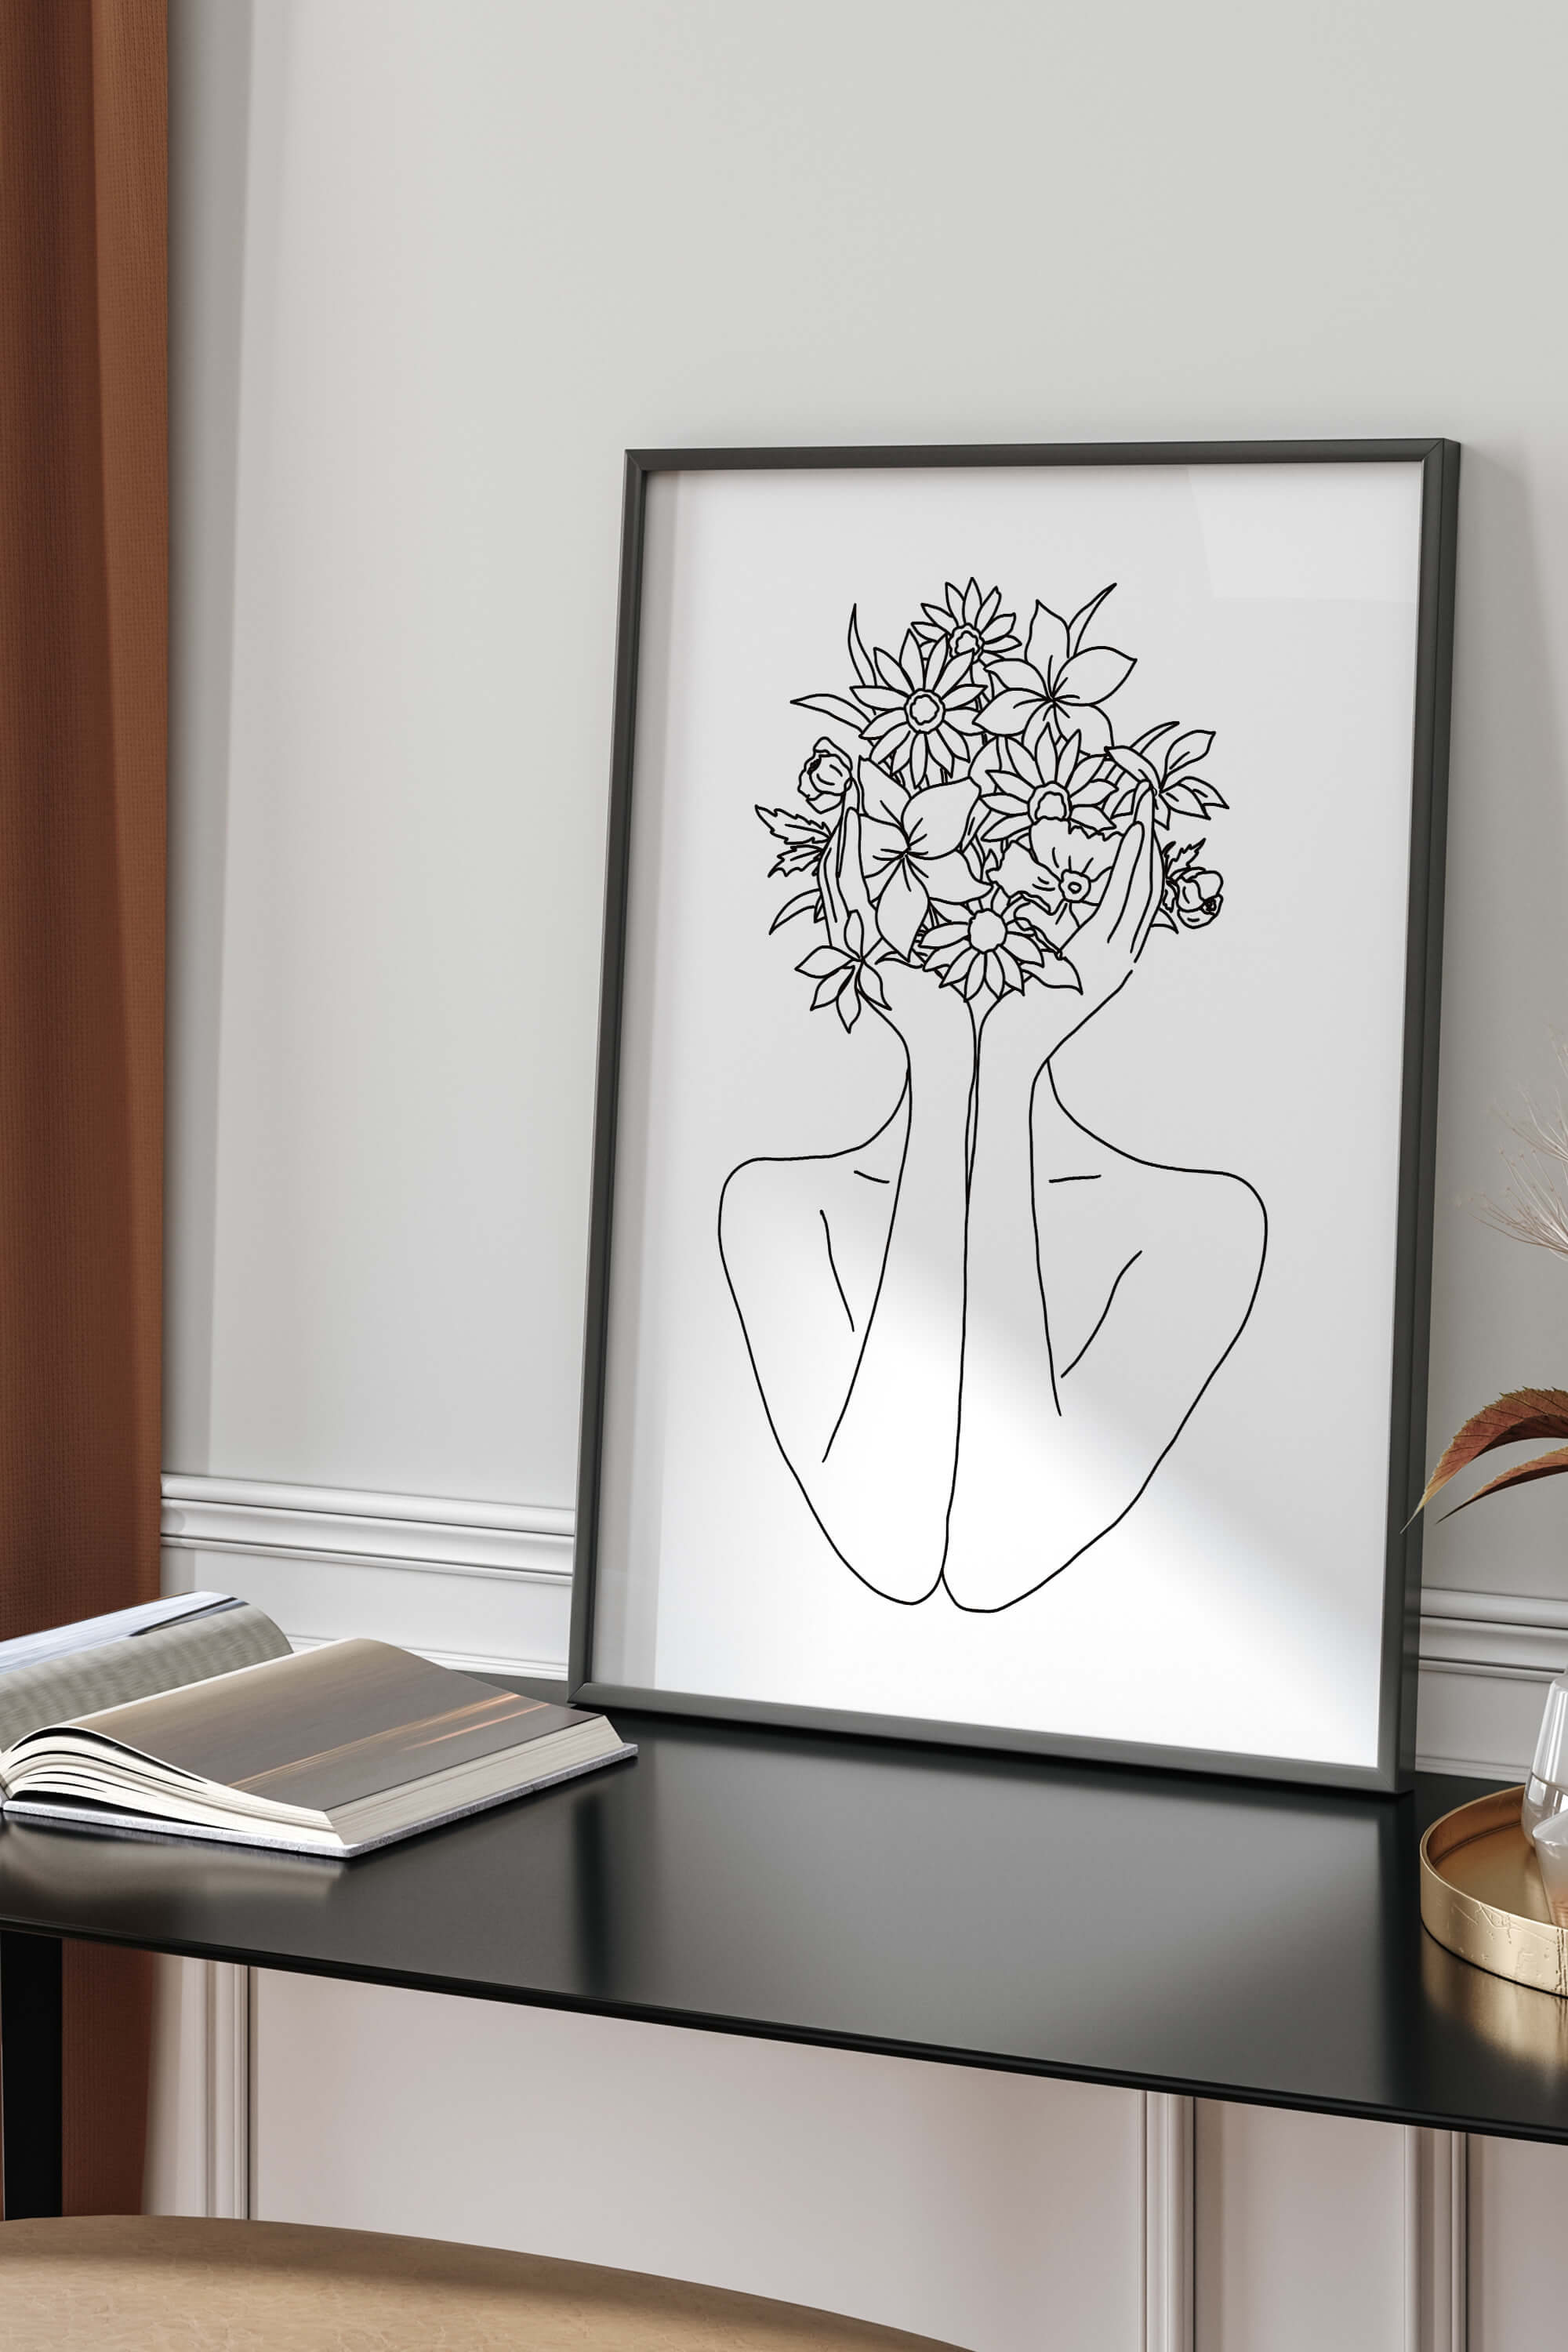 Contemporary and chic, this abstract floral wall art print features a woman's line drawing, combining elements of femininity and nature.